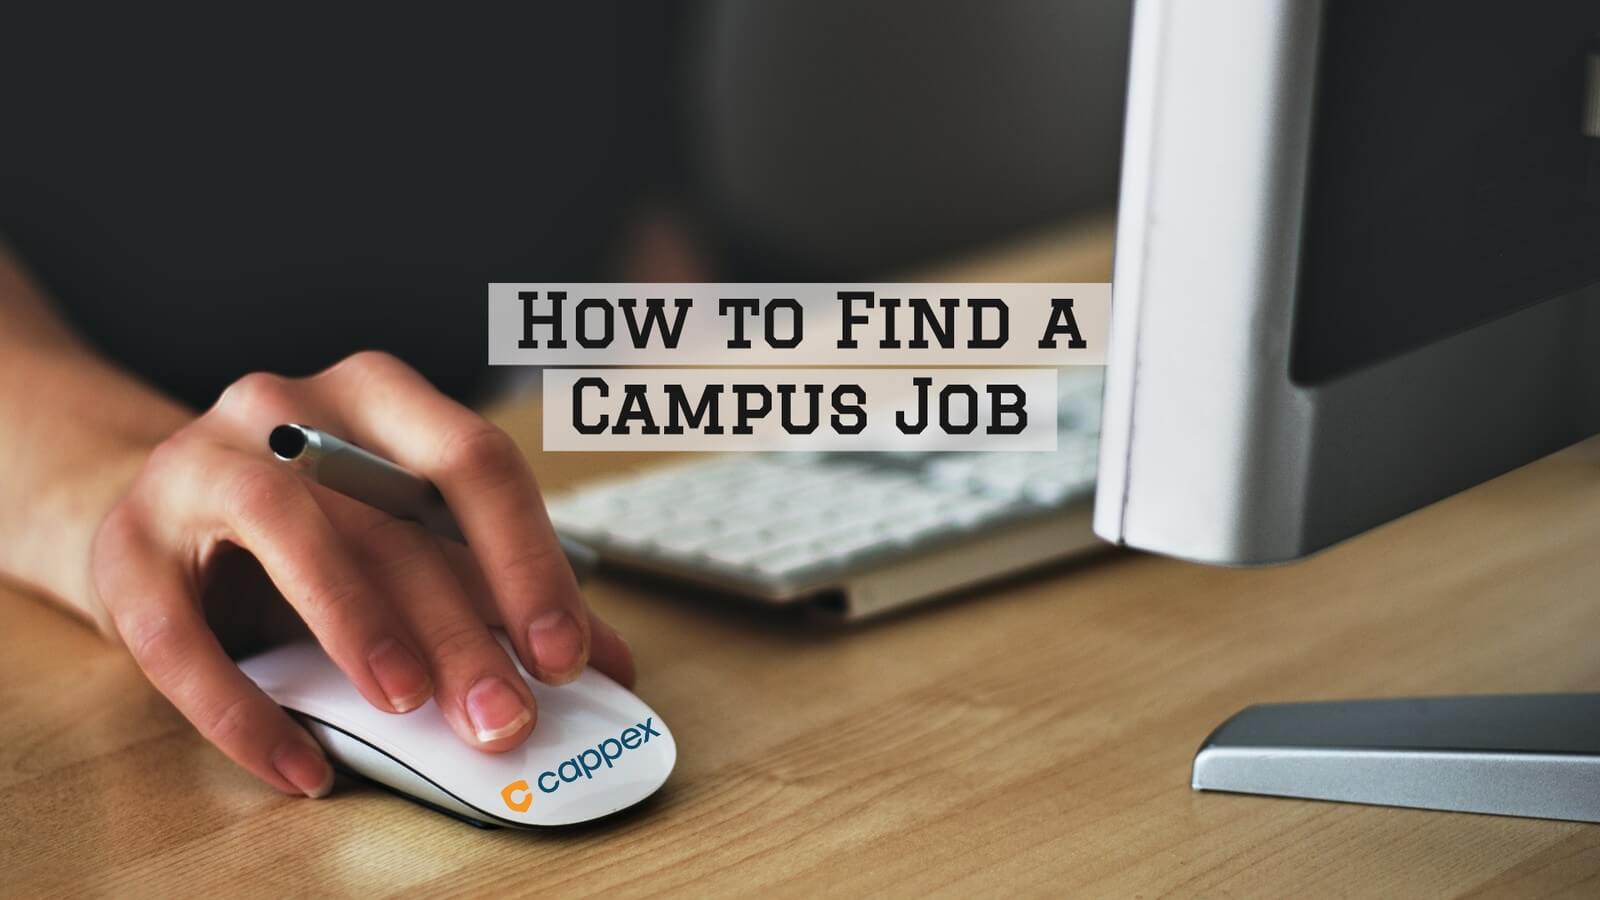 How to Find a Campus Job